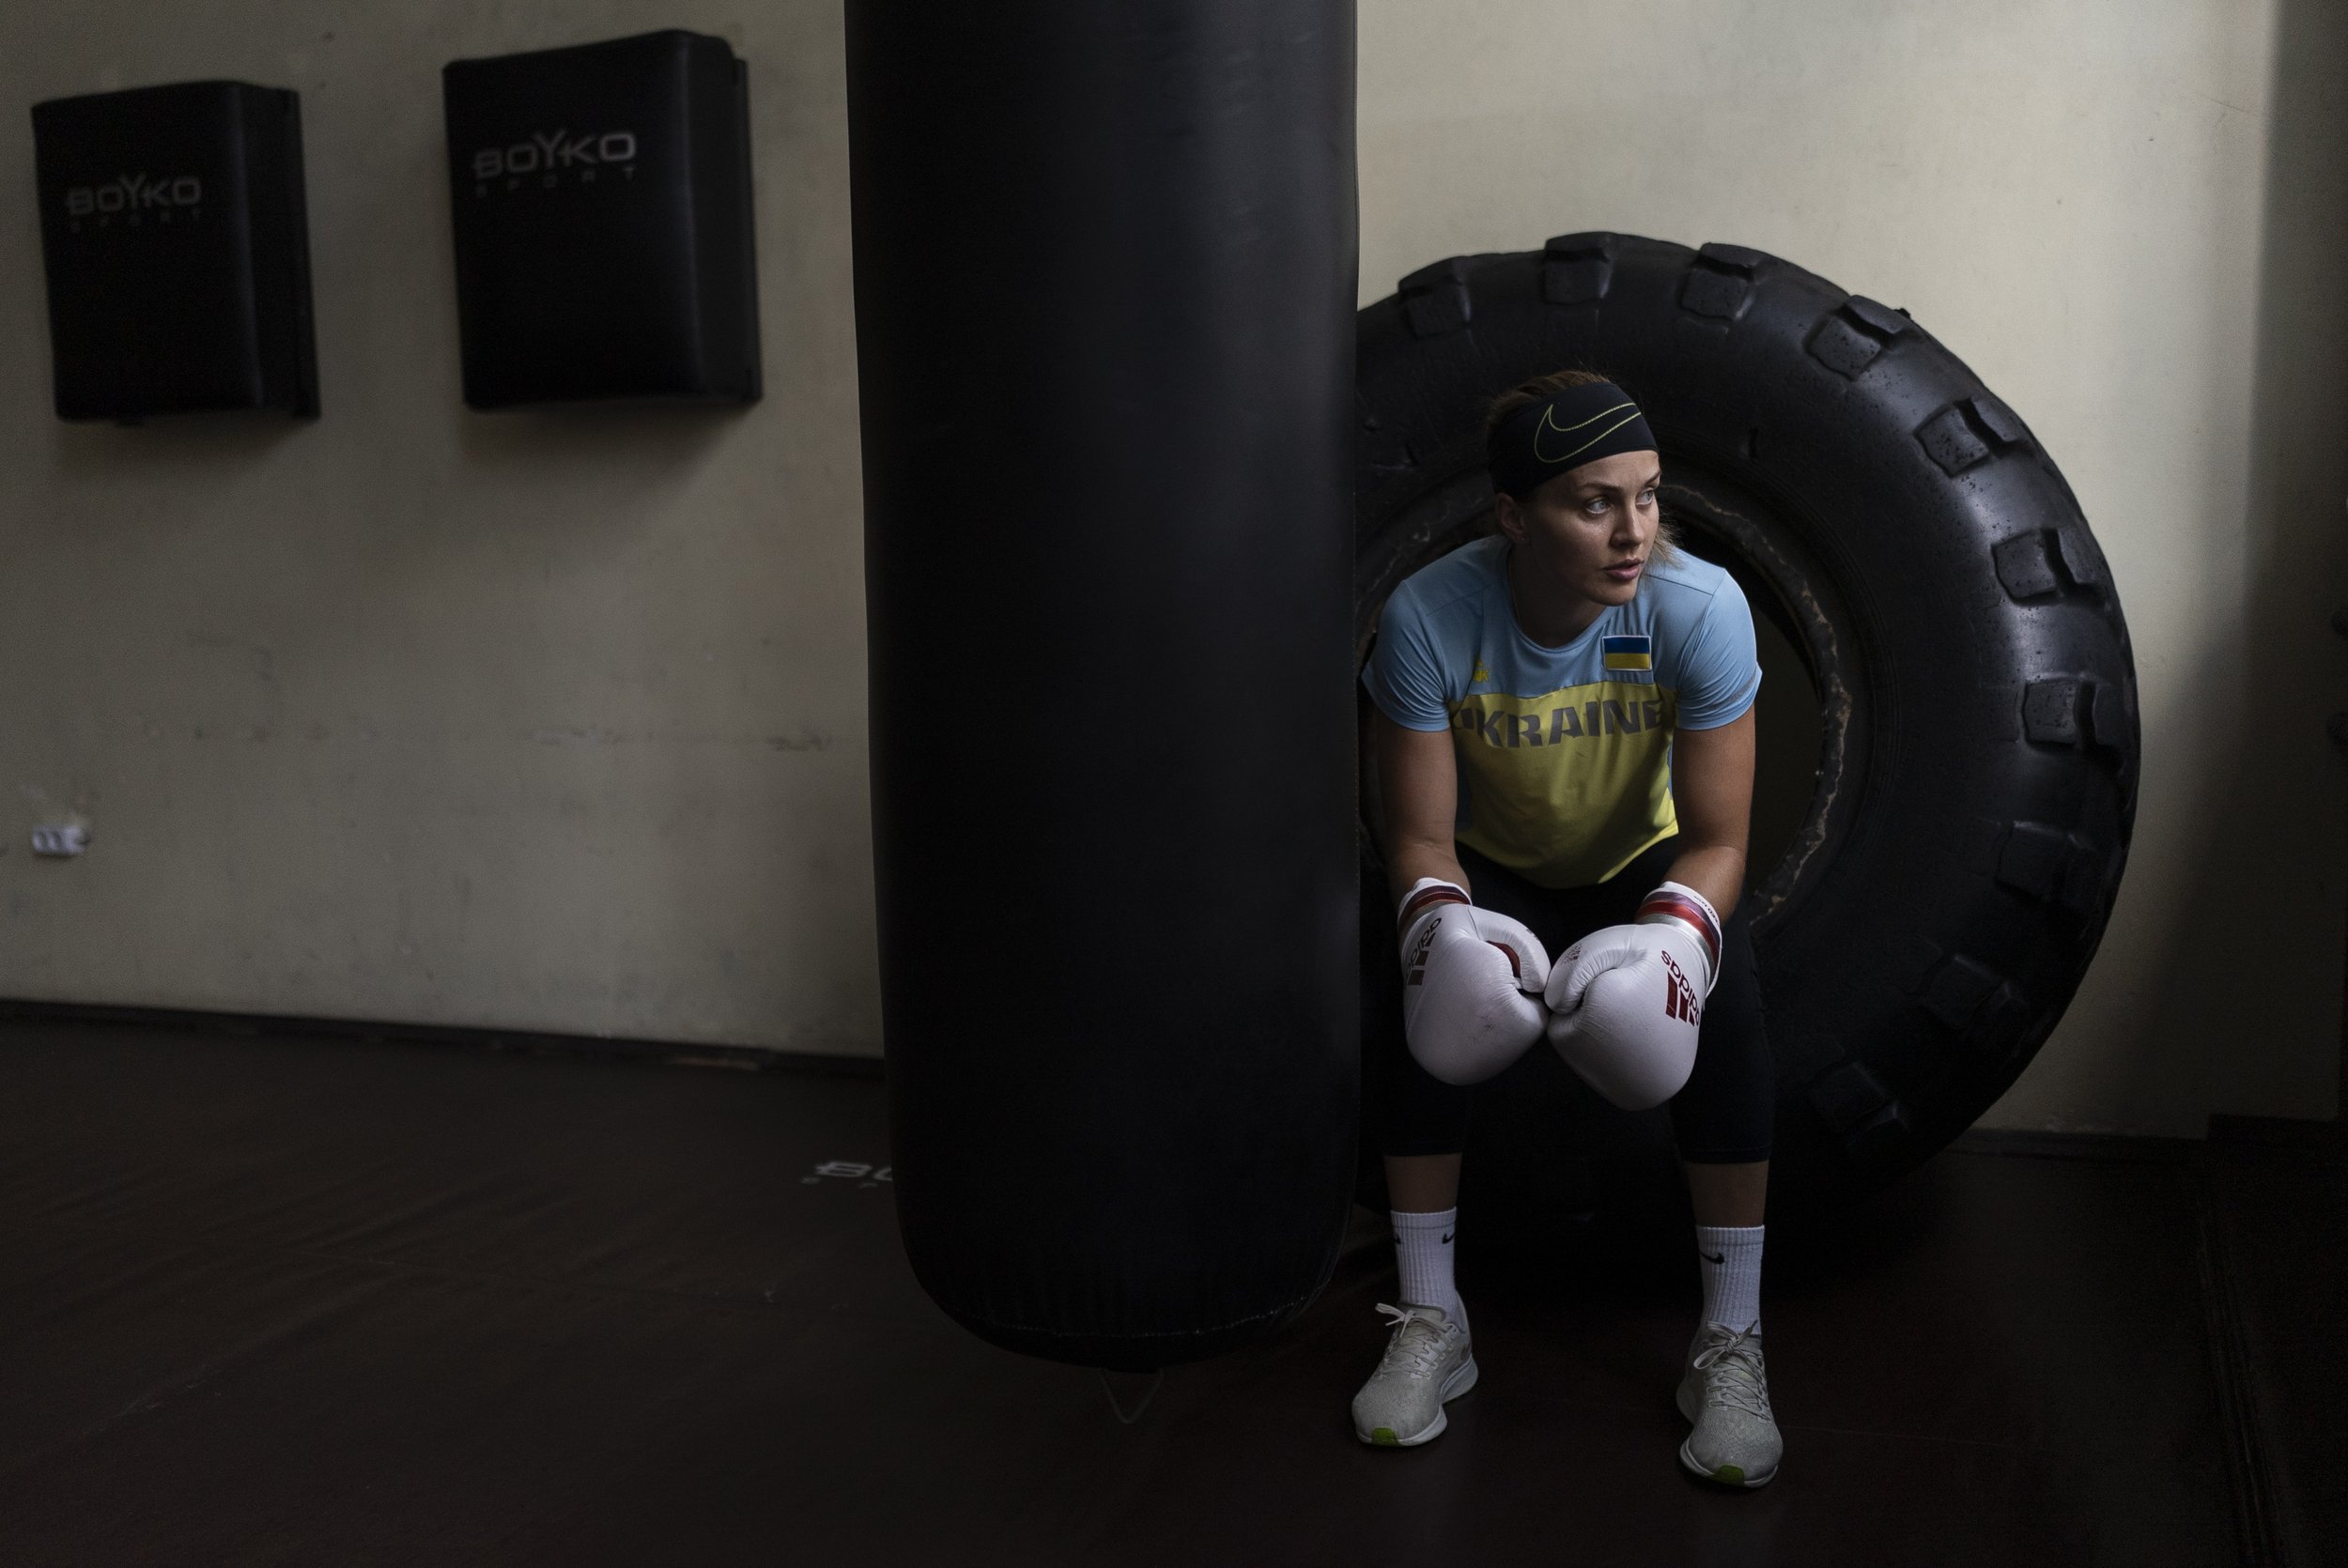  Ukrainian boxer Anna Lysenko sits on a tire during a short break in her training at Kiko Boxing Club in Kyiv, Ukraine, on July 11, 2023. Lysenko dedicates long hours preparing for next year's Paris Olympics, despite the unsettling sounds of explosio